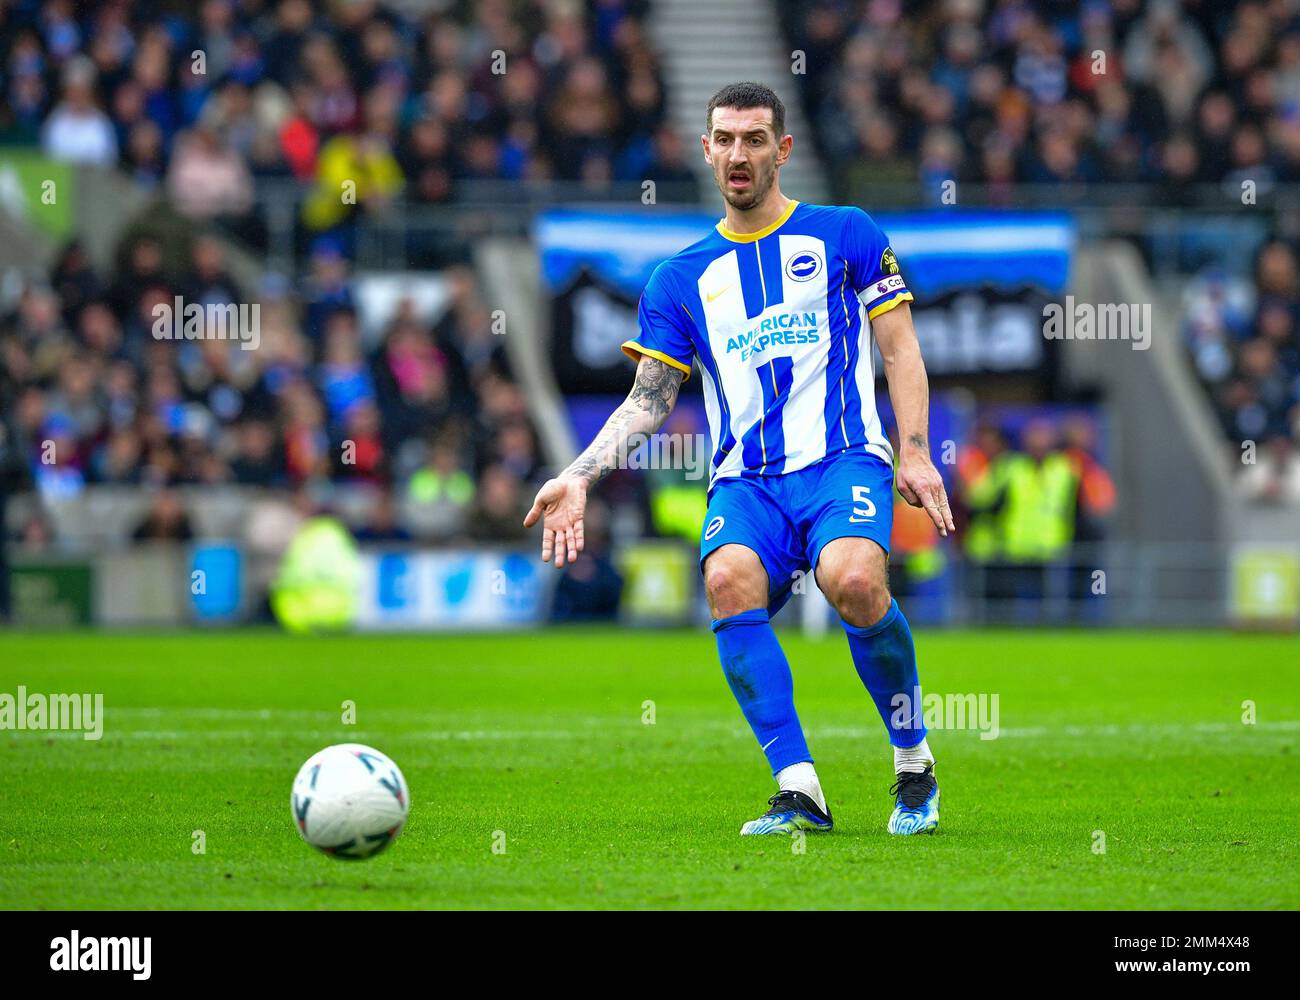 Brighton, UK. 29th Jan, 2023. Lewis Dunk of Brighton and Hove Albion during the FA Cup Fourth Round match between Brighton & Hove Albion and Liverpool at The Amex on January 29th 2023 in Brighton, England. (Photo by Jeff Mood/phcimages.com) Credit: PHC Images/Alamy Live News Stock Photo